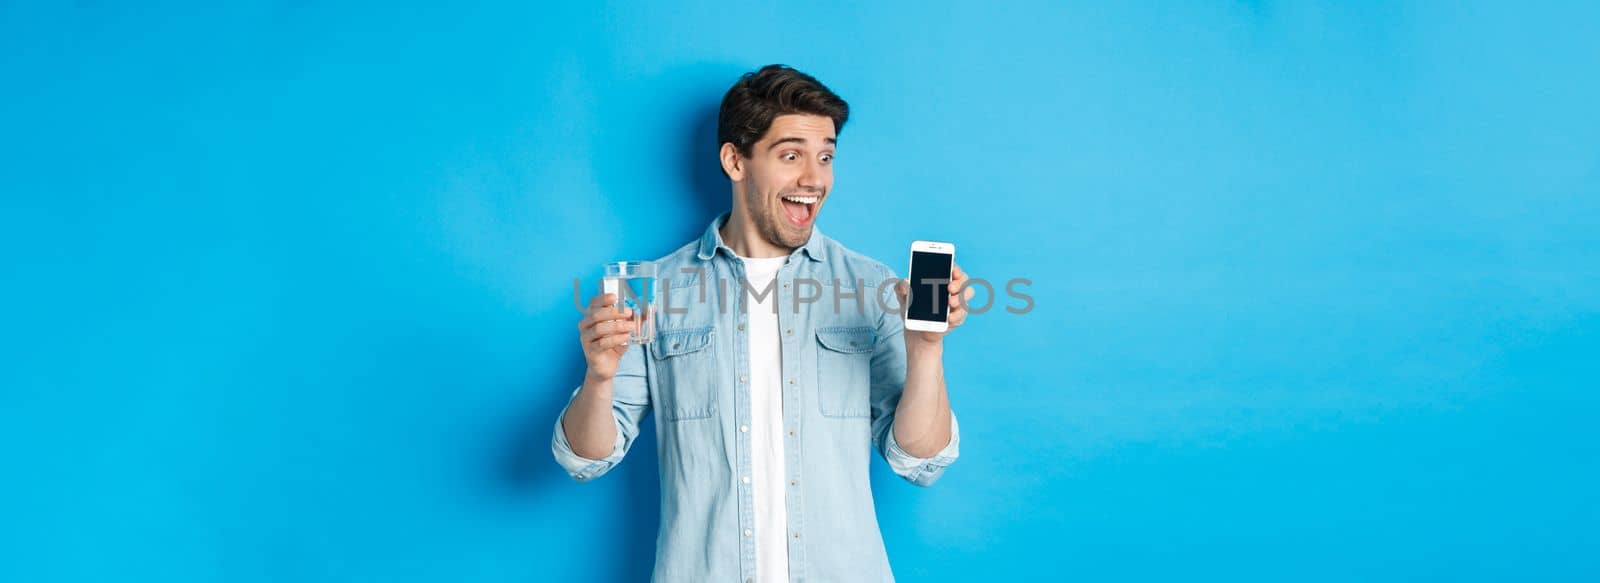 Happy man looking excited at mobile phone screen, holding glass of water, standing over blue background.